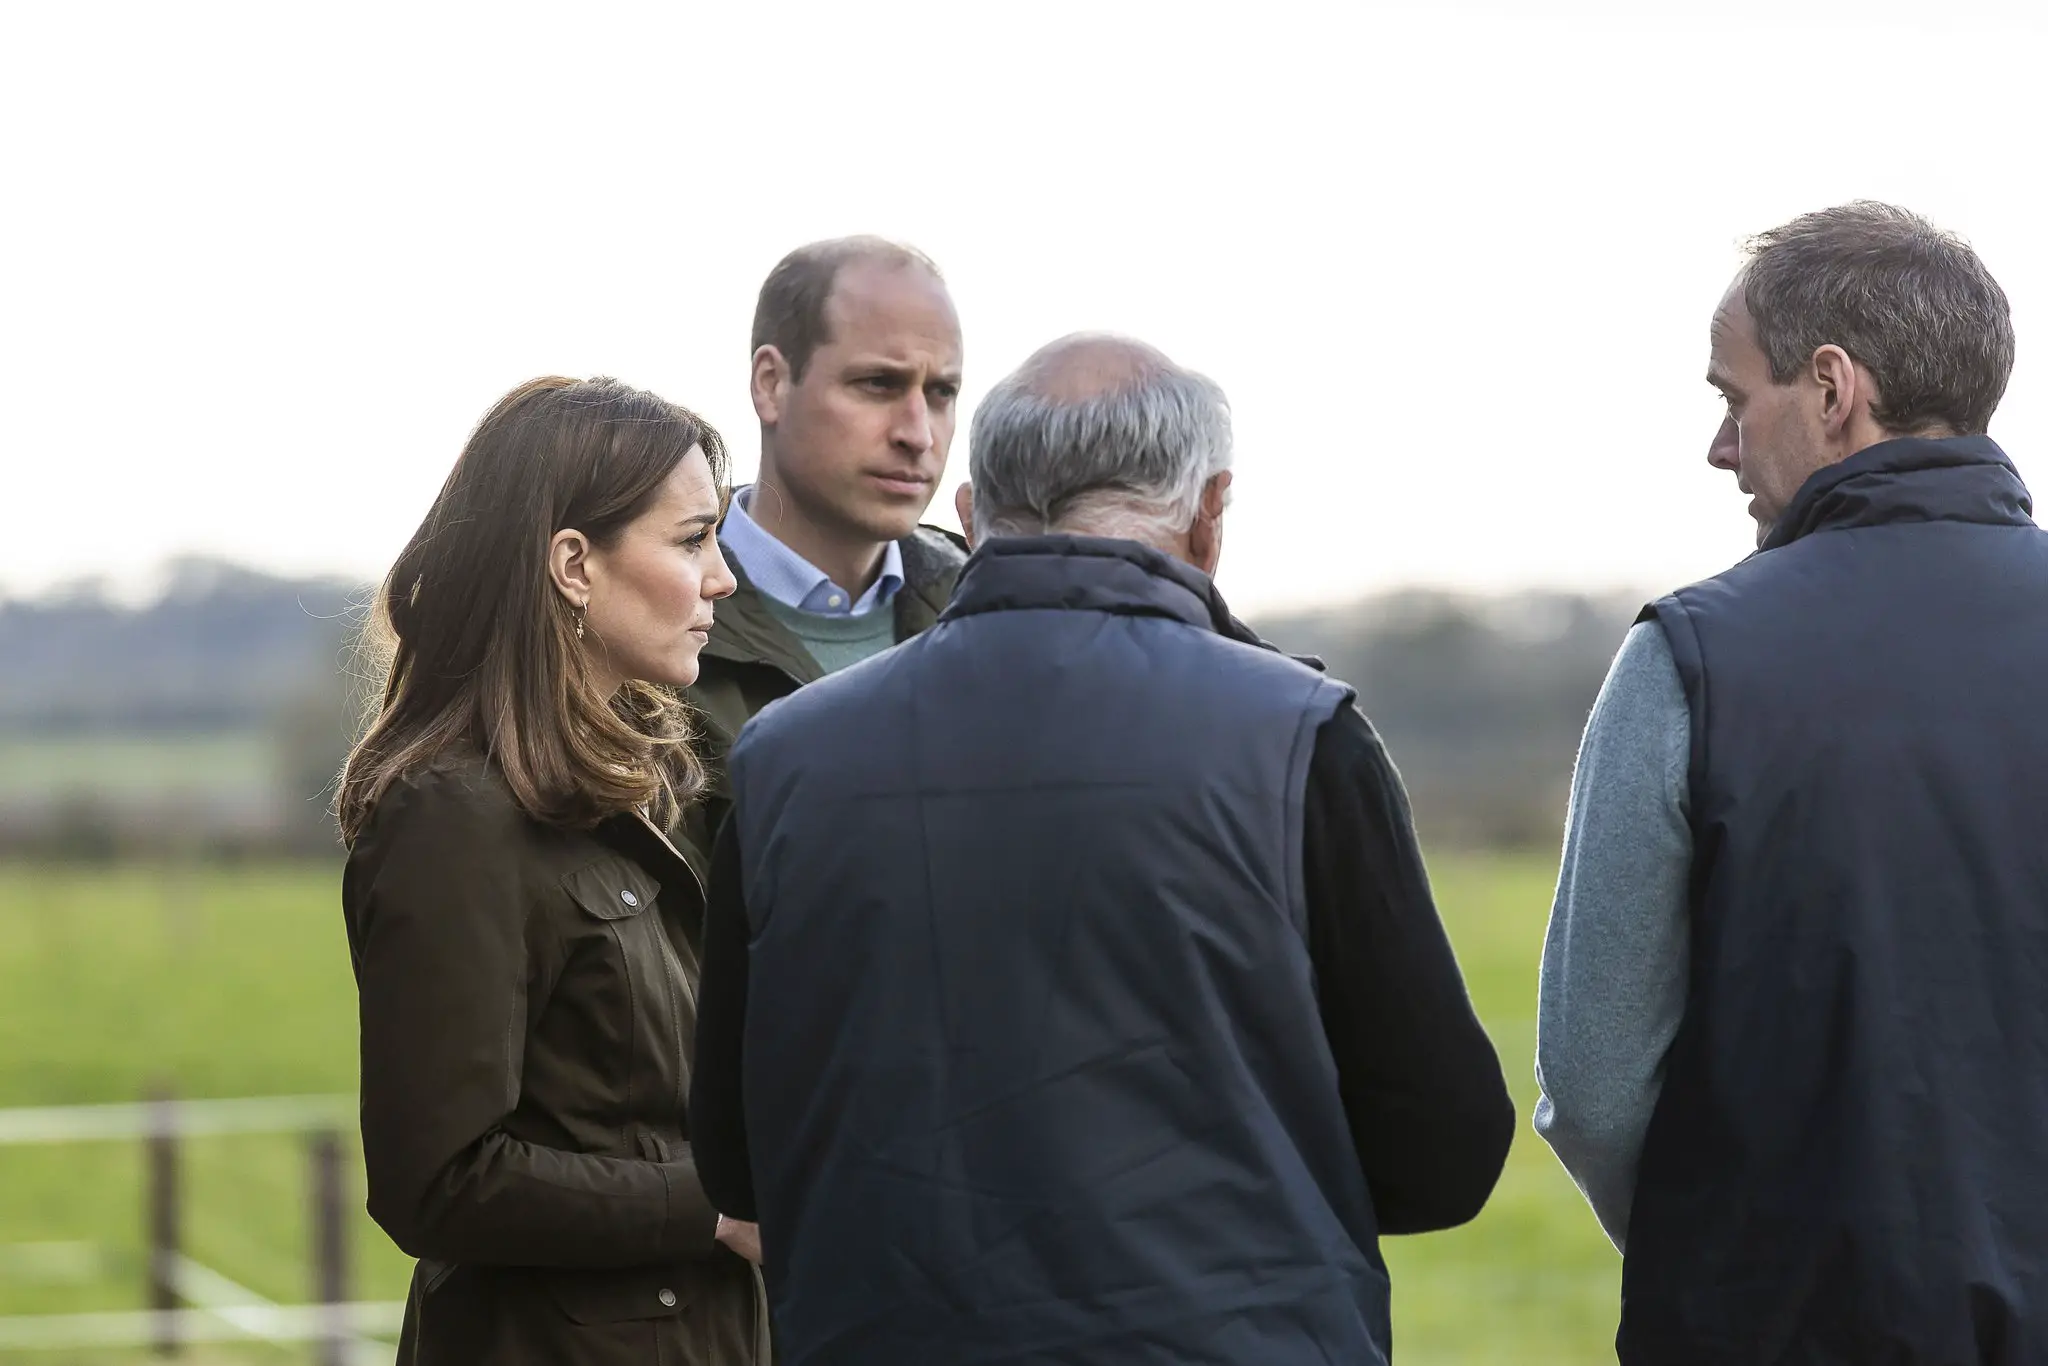 The Duke and Duchess of Cambridge were also shown three cows, each with twin calves